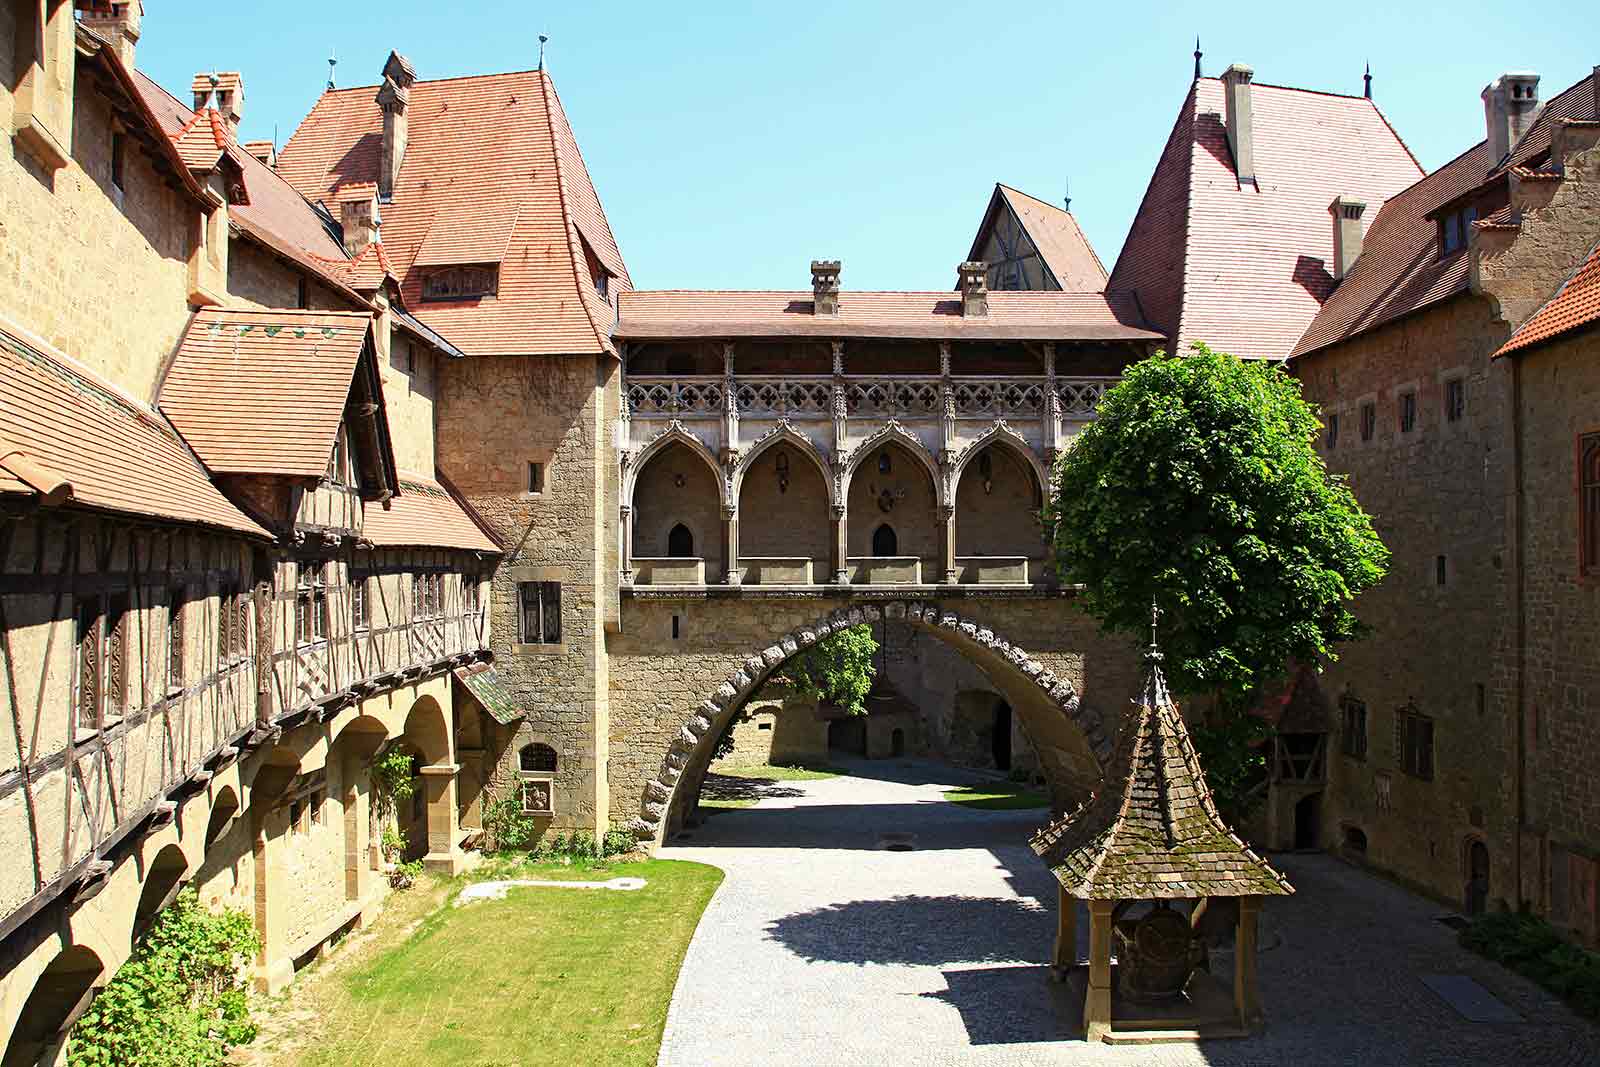 The inside of Burg Kreuzenstein is just as beautiful as the outside.